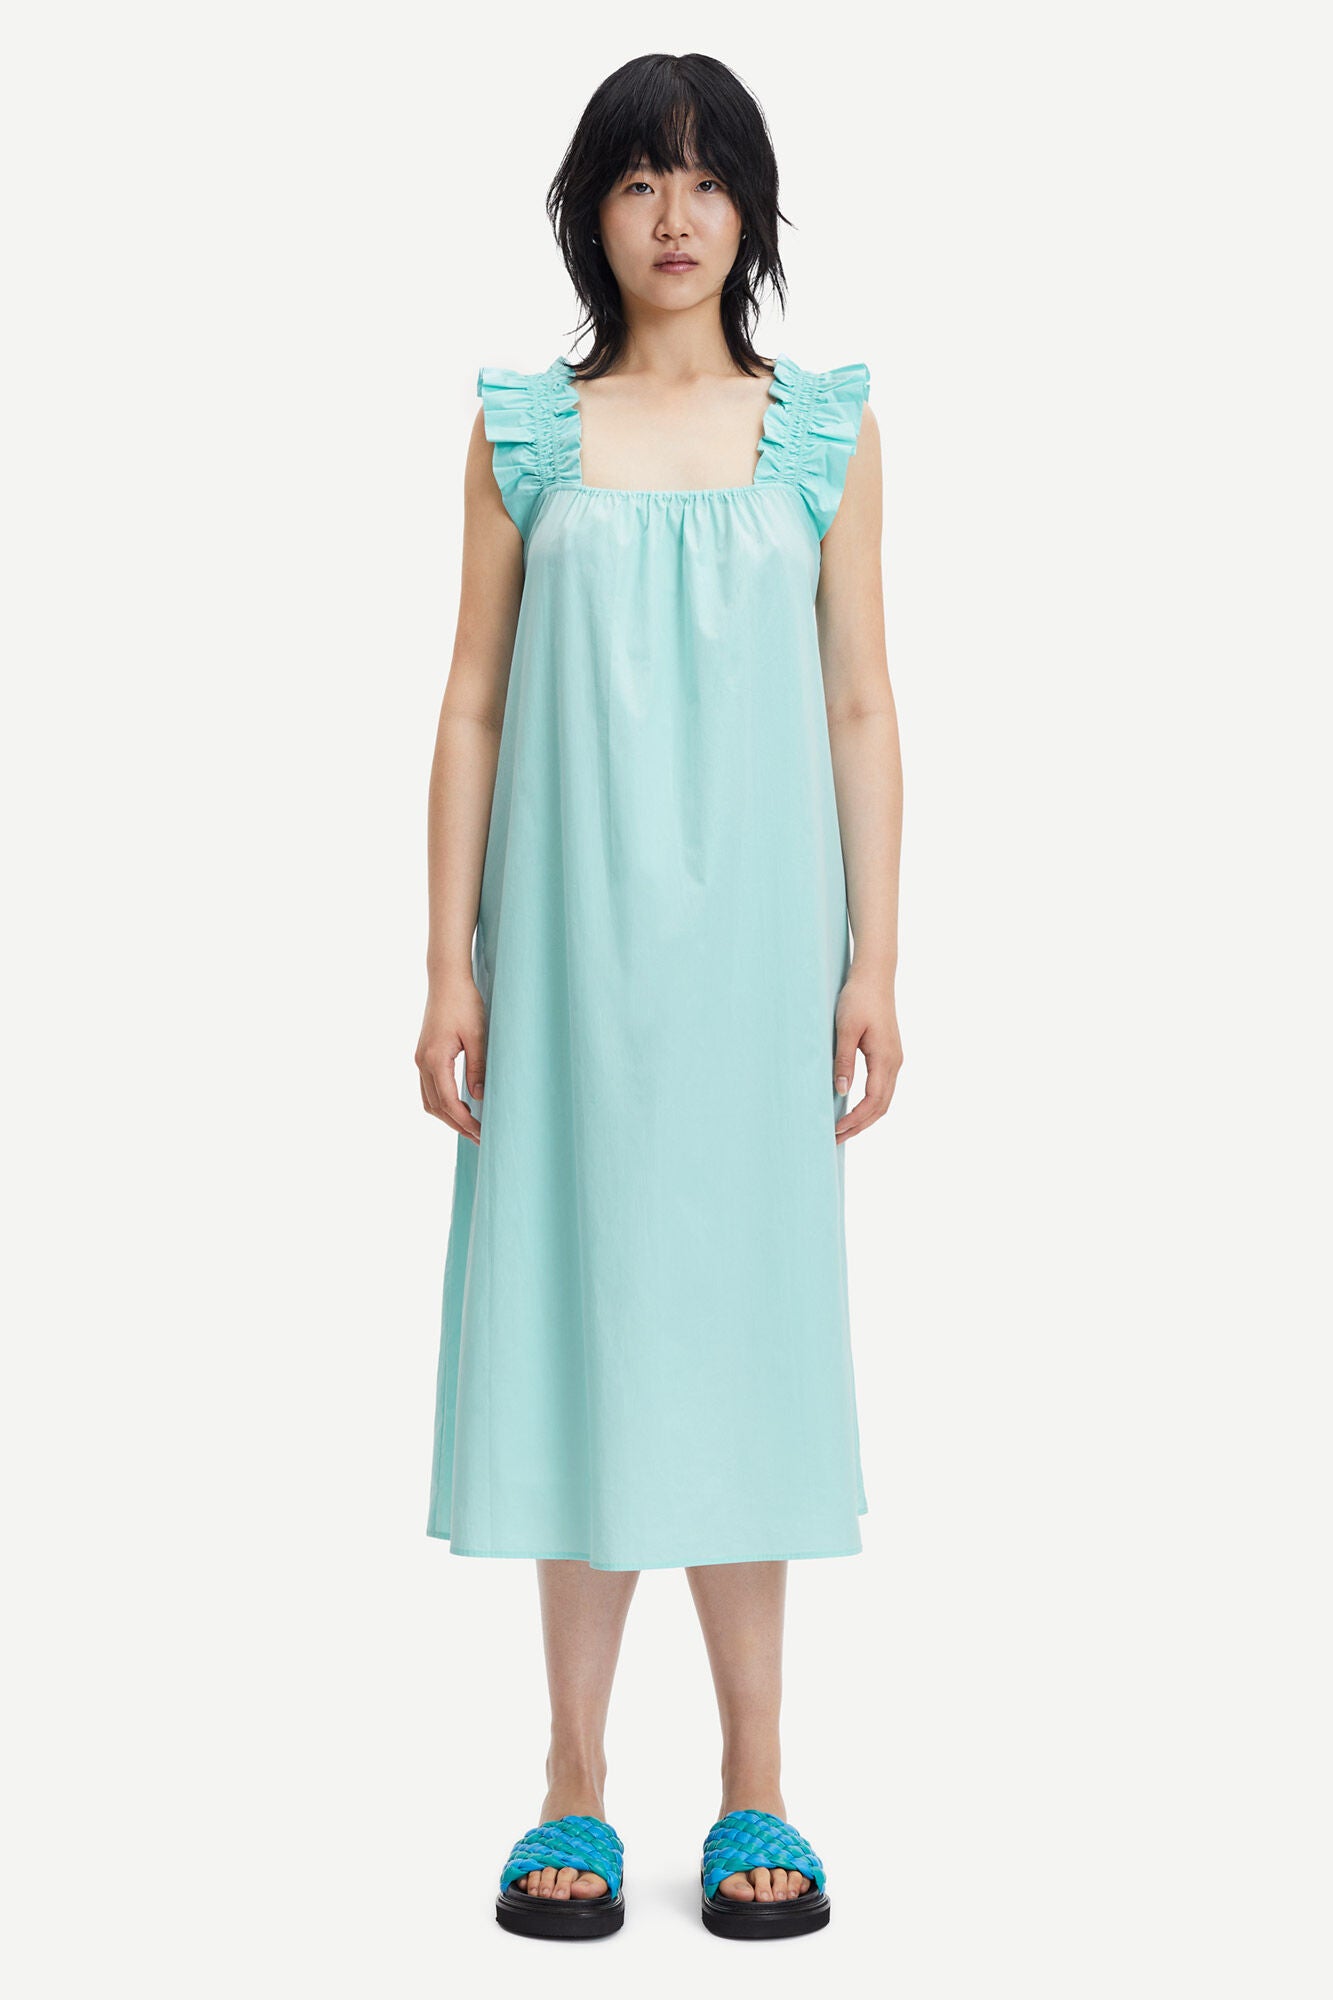 Organic cotton dress with a square neck and ruffle straps